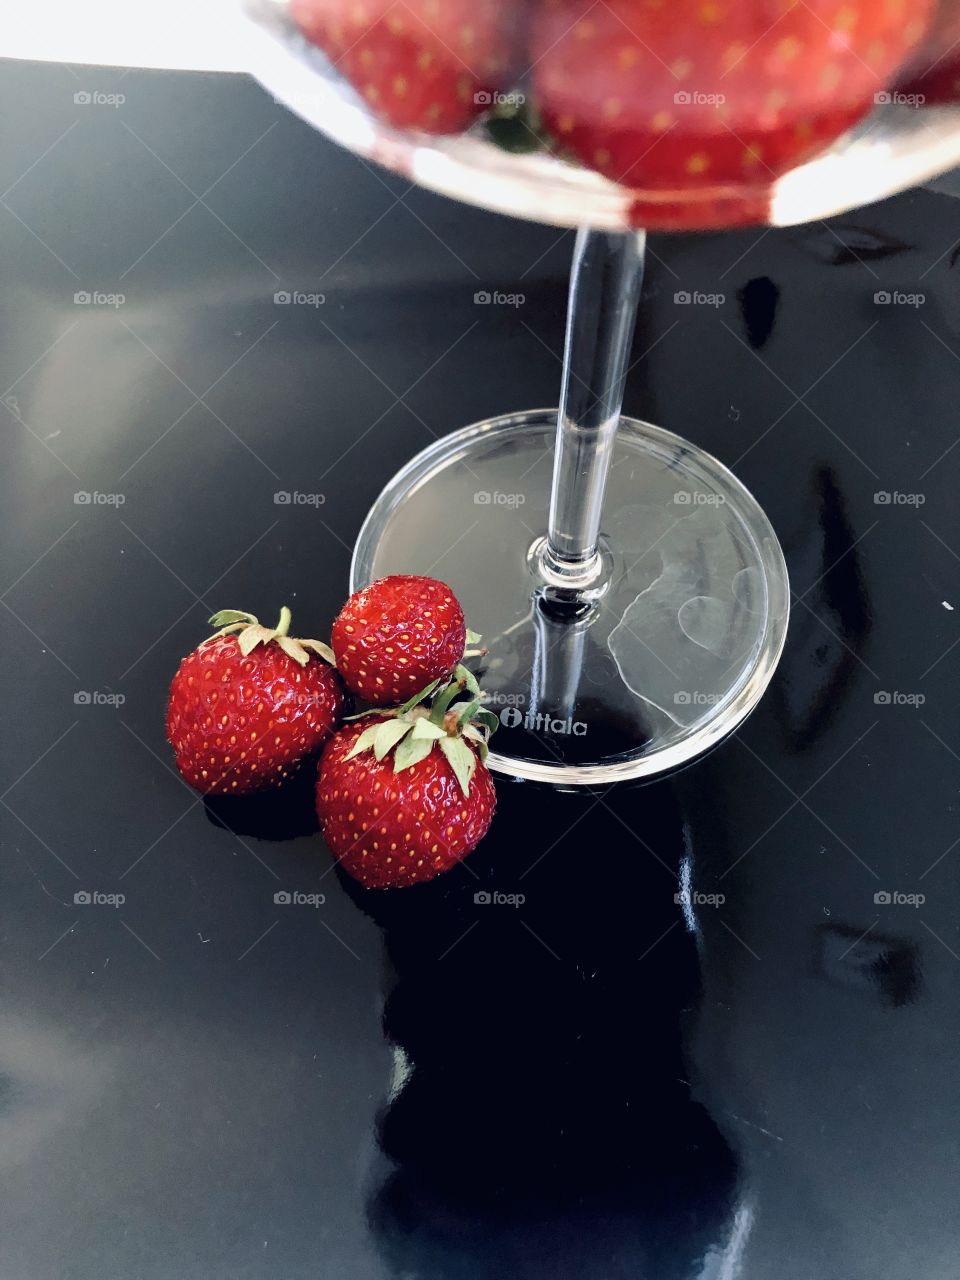 Strawberries with a black background. Summer is here! Less is more. 